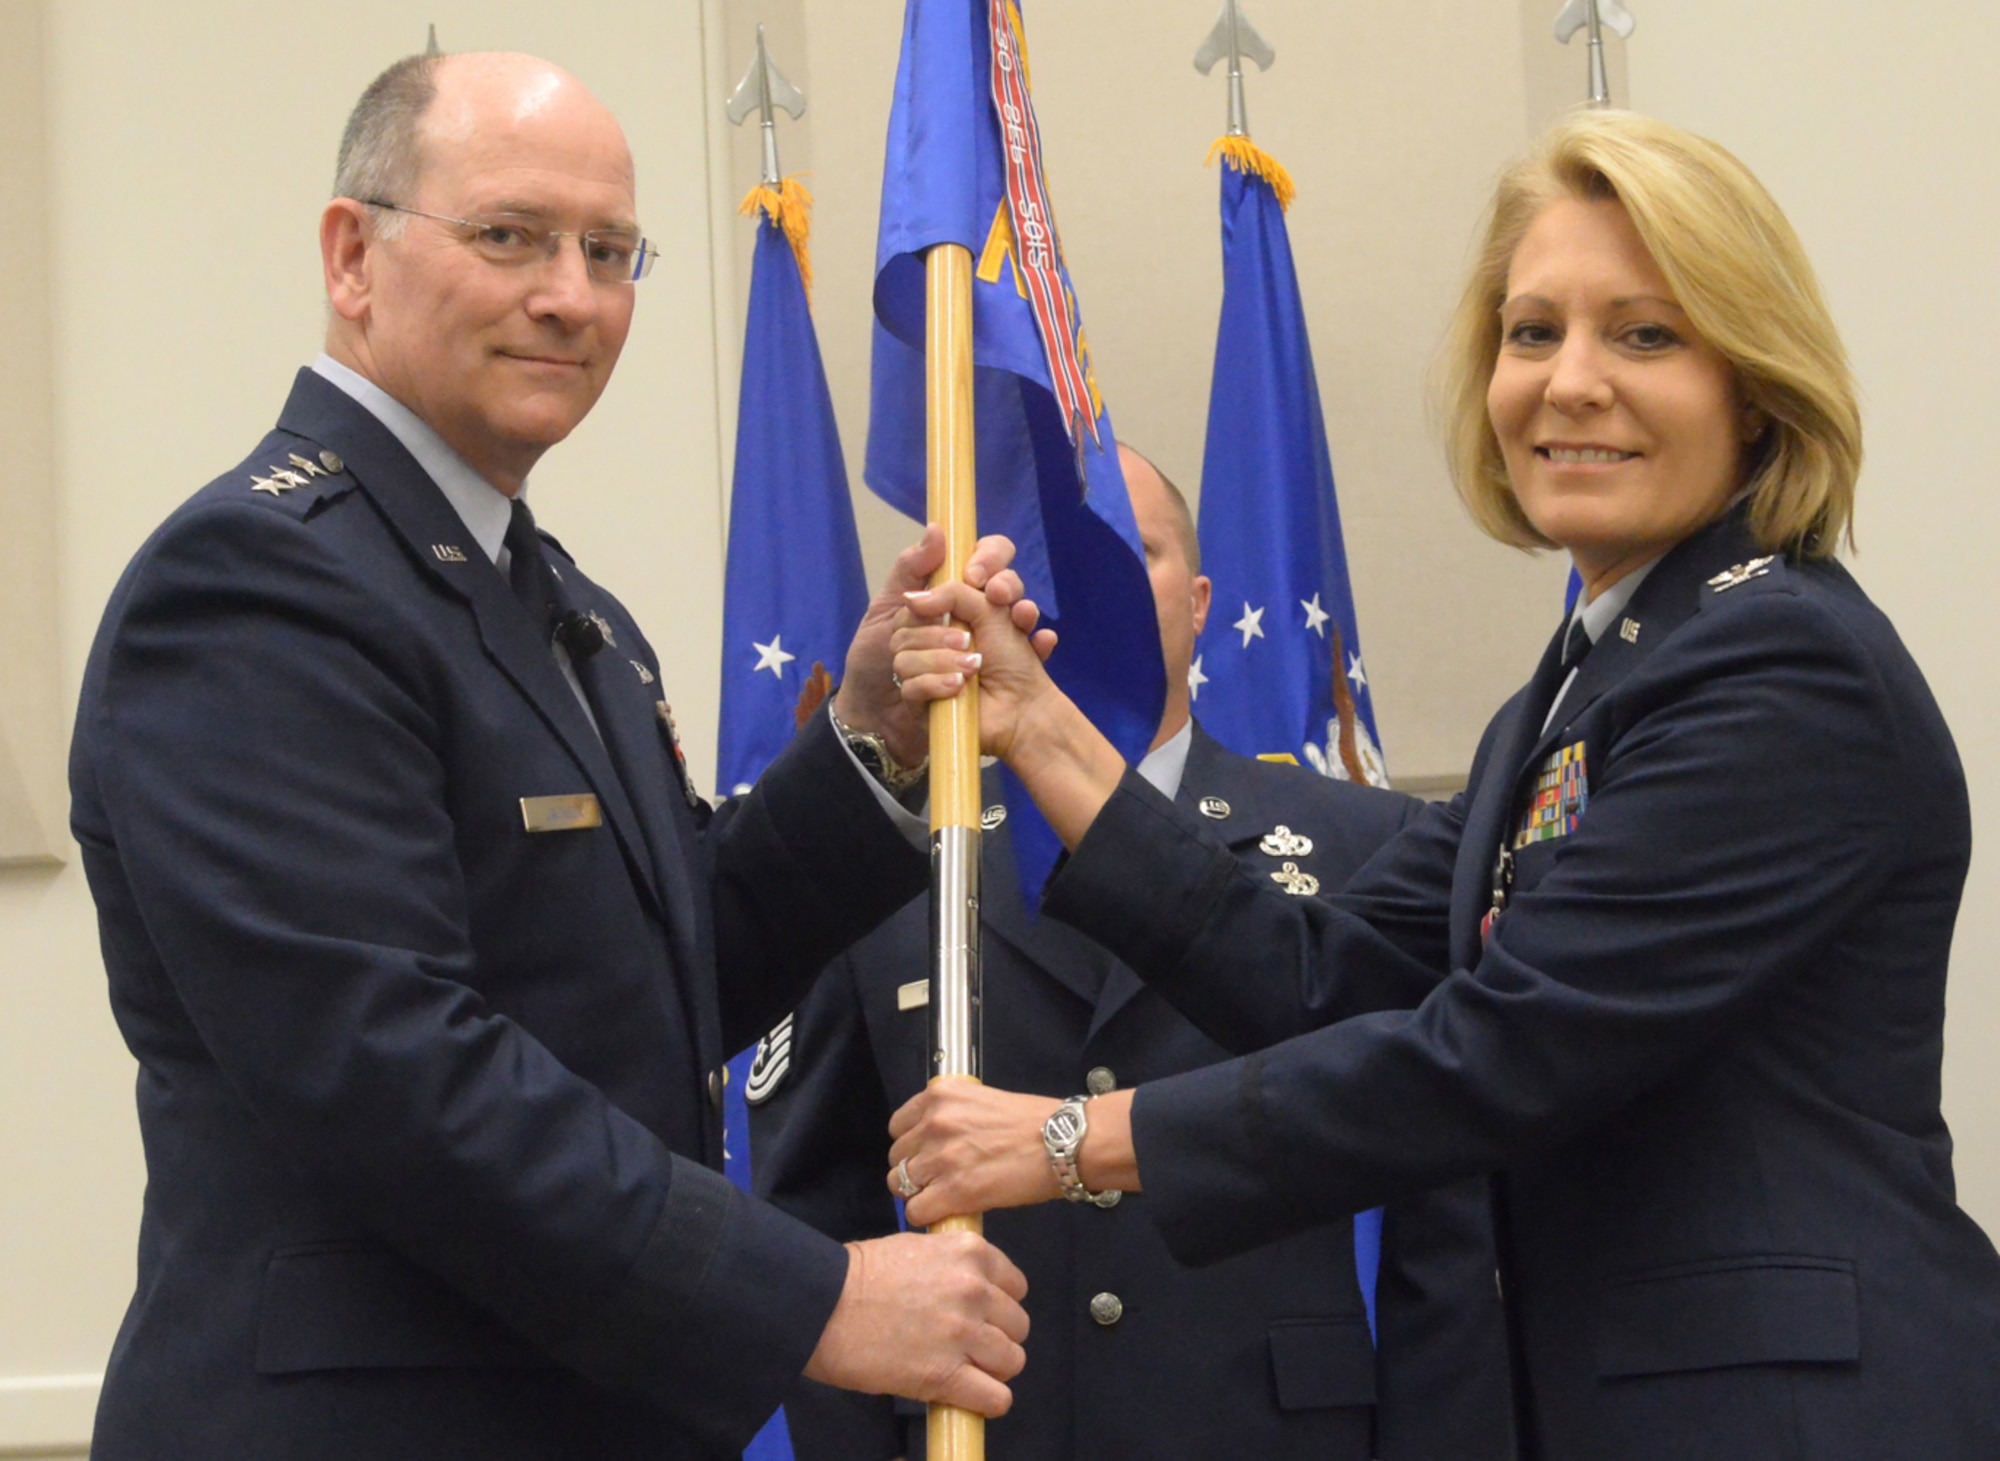 Col. Dawn M. Wallace, Readiness Management Group commander, presents the RMG flag to Lt. Gen. James F. Jackson, chief of Air Force Reserve and commander of Air Force Reserve Command, for encasement during the RMG inactivation ceremony at Robins Air Force Base, Ga., July 1, 2014. The RMG was created in April 2005 at the base to centralize the management of the command’s individual mobilization augmentees. (U.S. Air Force photo/Ray Crayton)